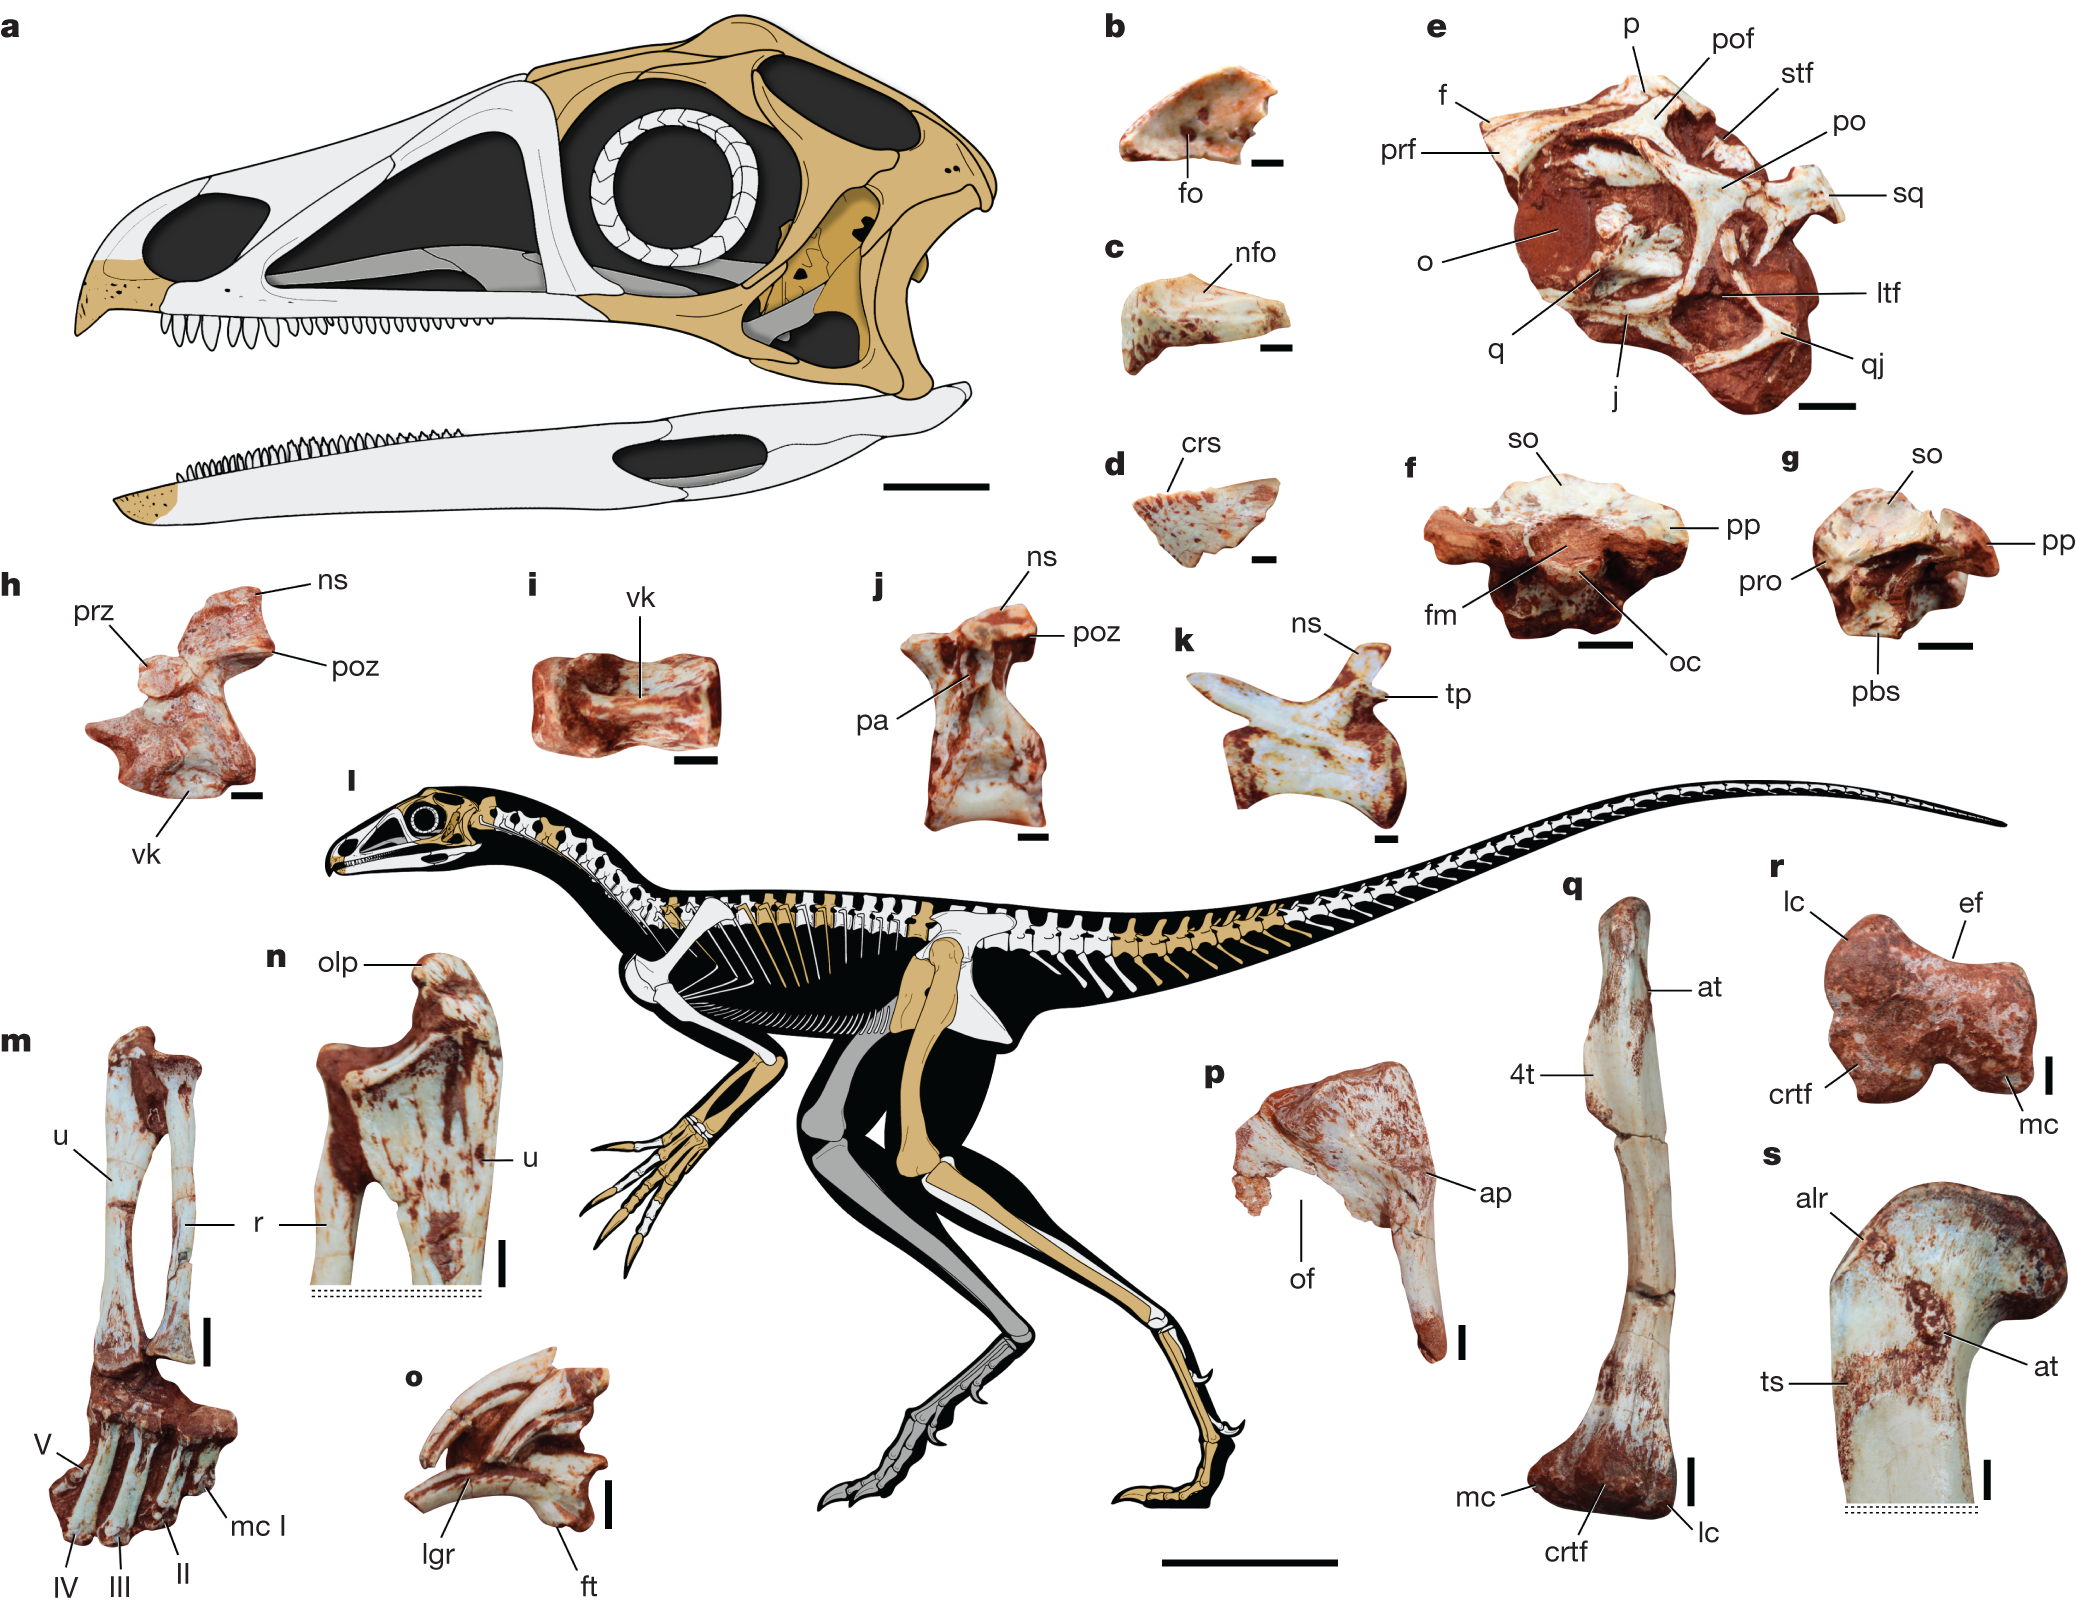 Reassessment of Faxinalipterus minimus, a purported Triassic